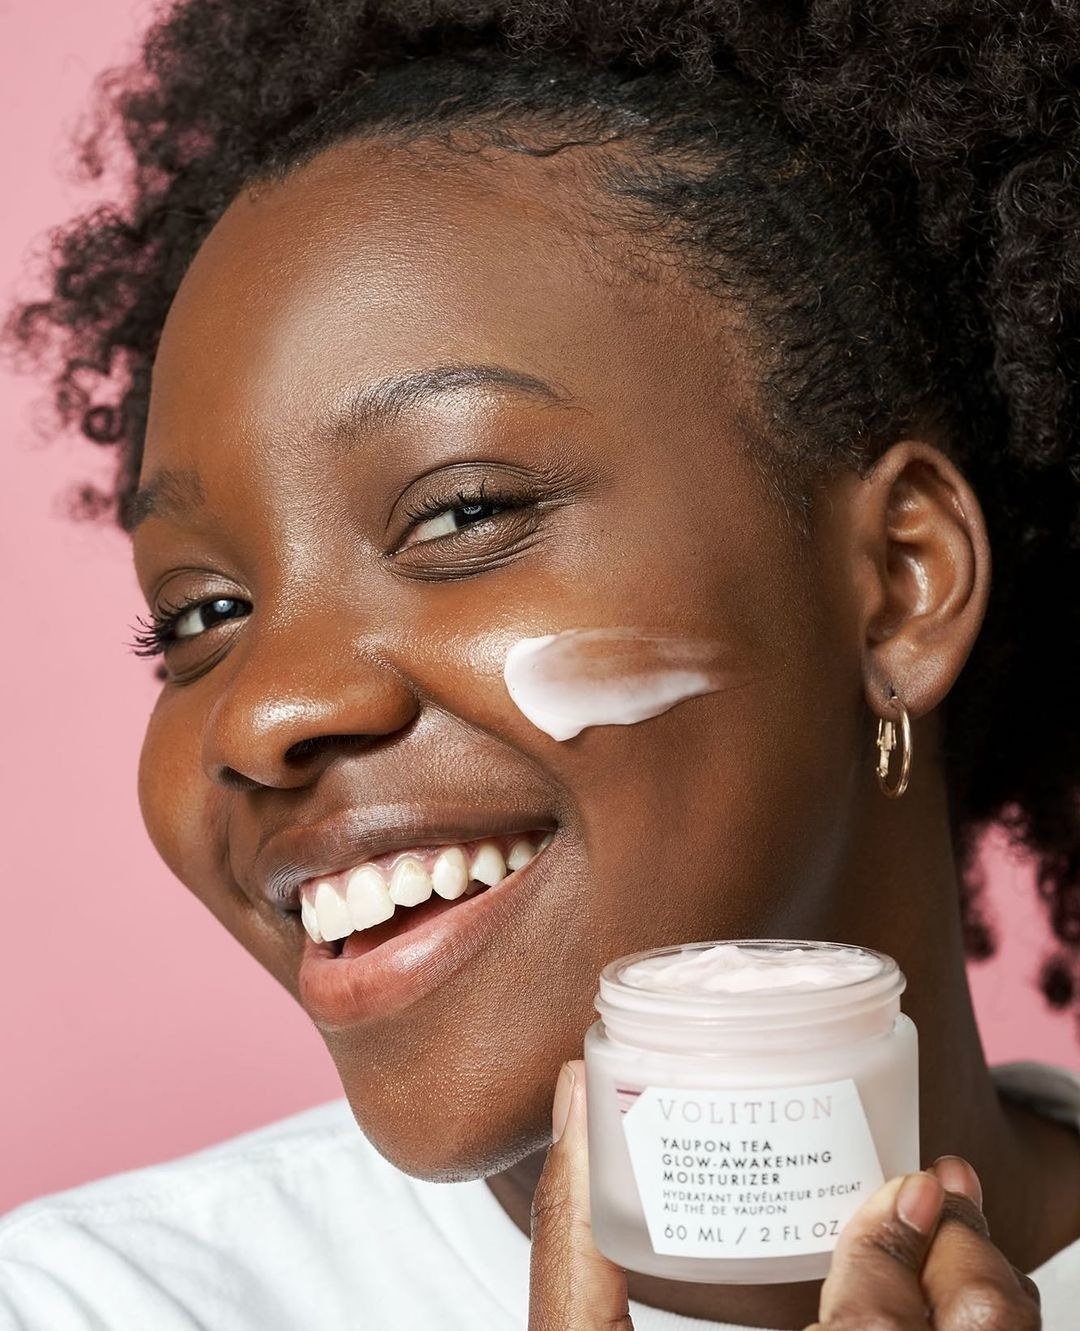 A smiling person applying the cream to their face